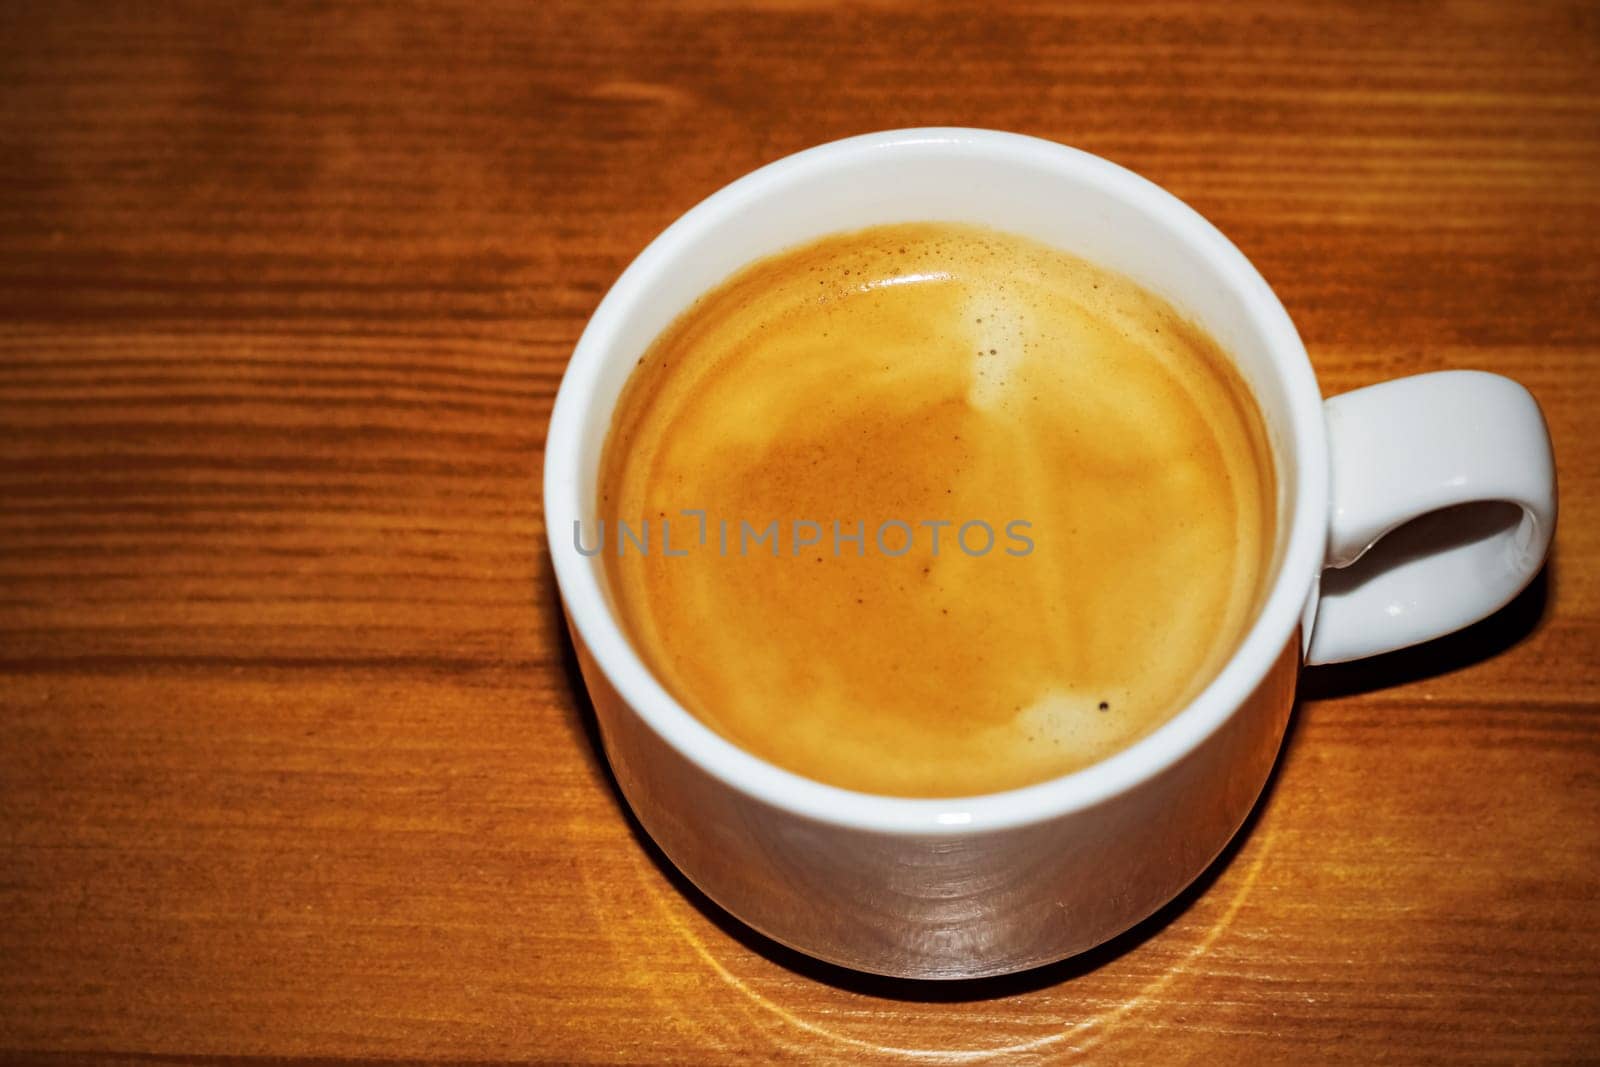 Cup of coffee on a wooden table with copy space